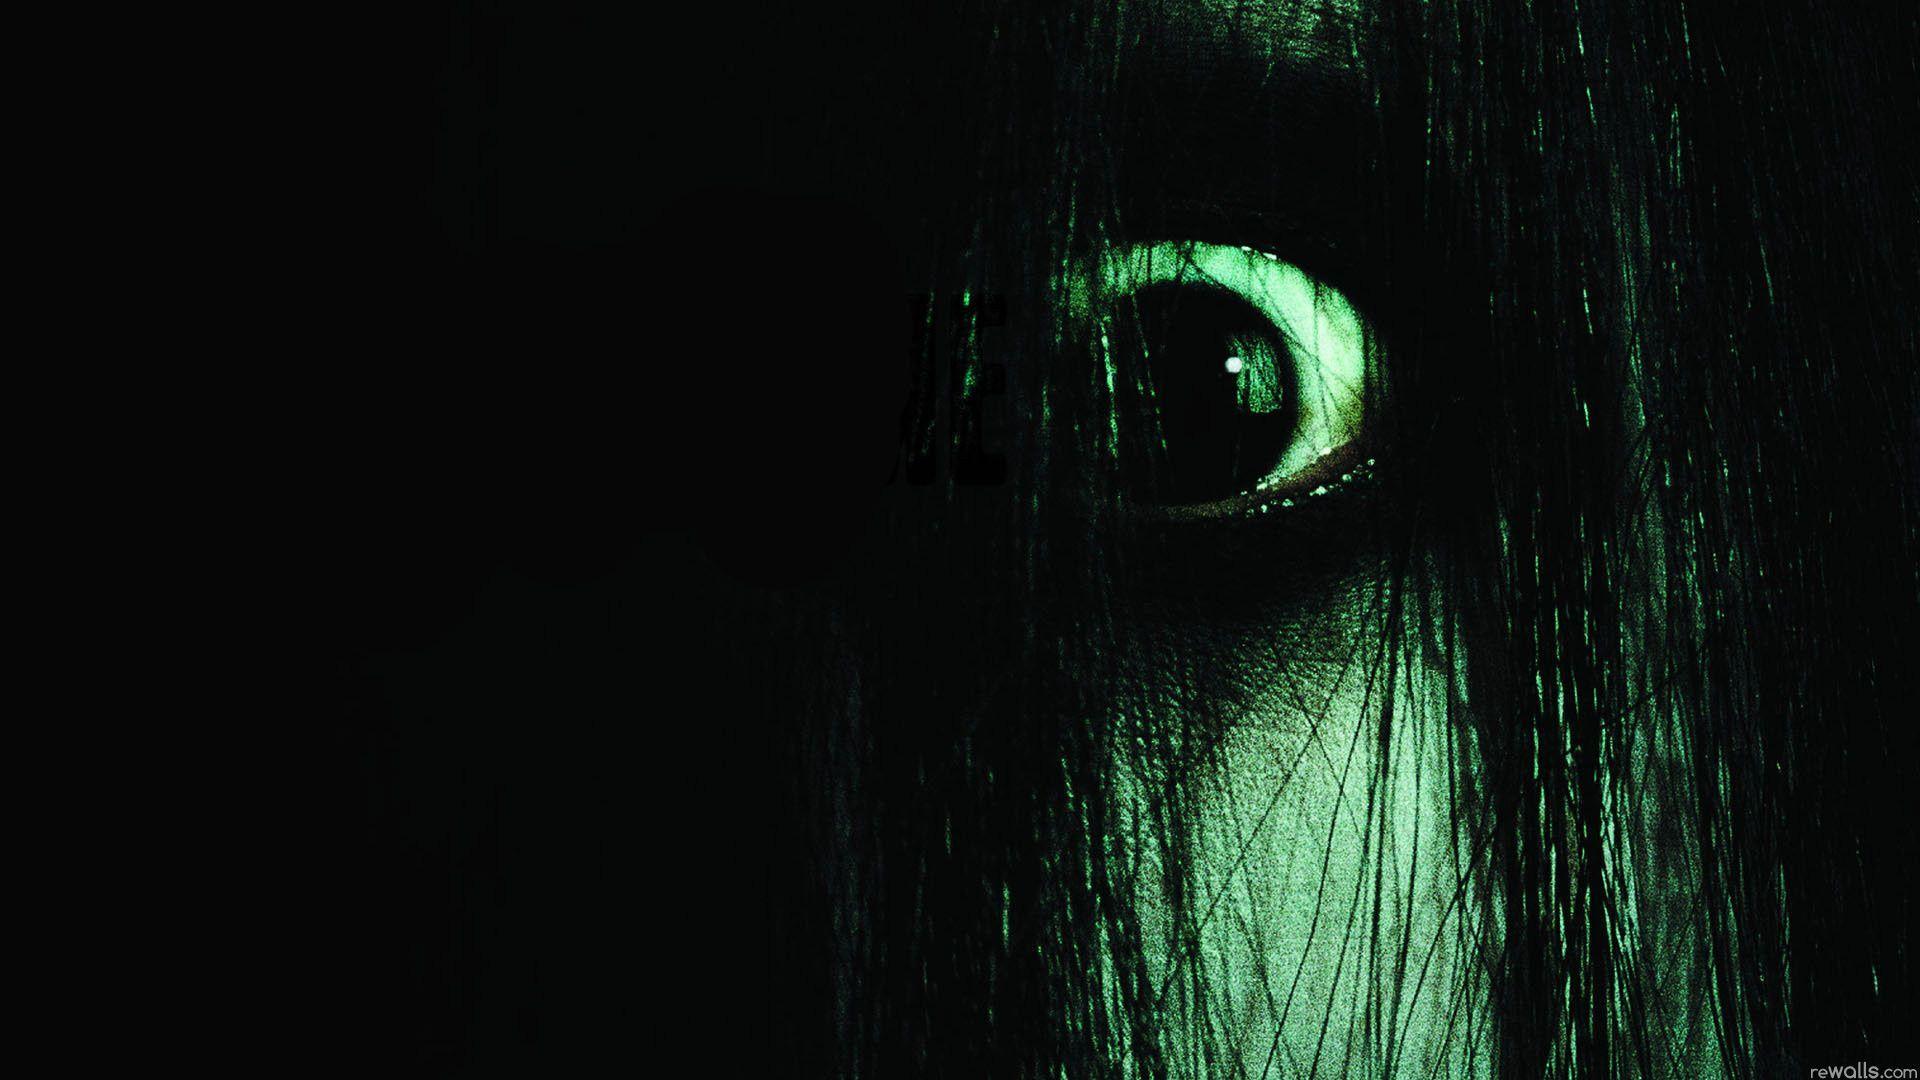 Haunted Eyes. Real Haunted Houses, The Unexplained & Spooky Things